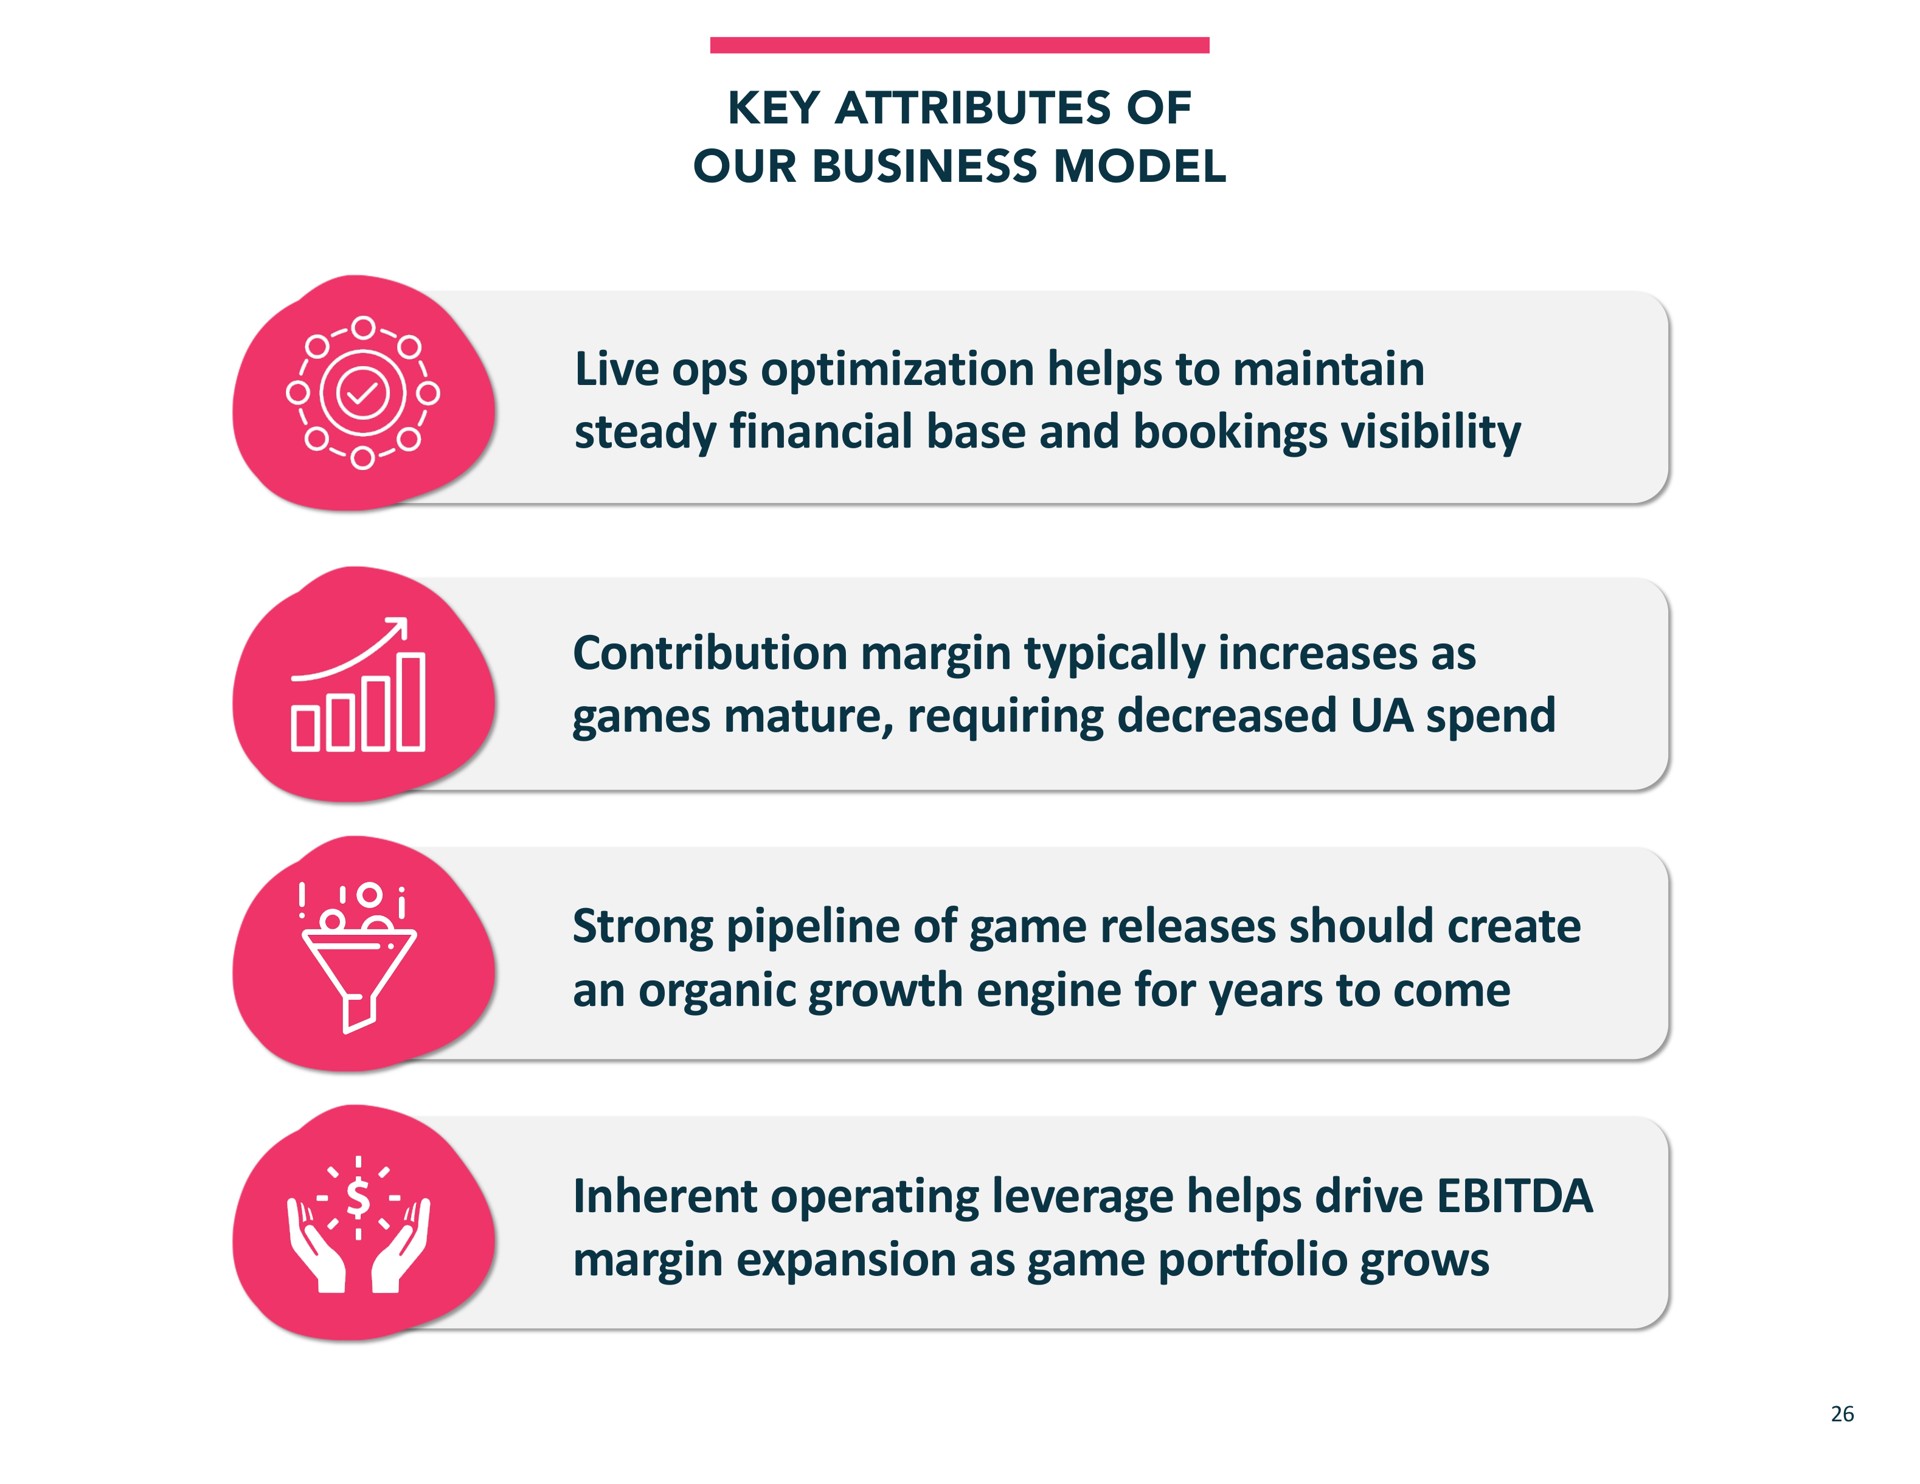 key attributes of our business model live optimization helps to maintain steady financial base and bookings visibility contribution margin typically increases as games mature requiring decreased spend strong pipeline of game releases should create an organic growth engine for years to come inherent operating leverage helps drive margin expansion as game portfolio grows | Jam City